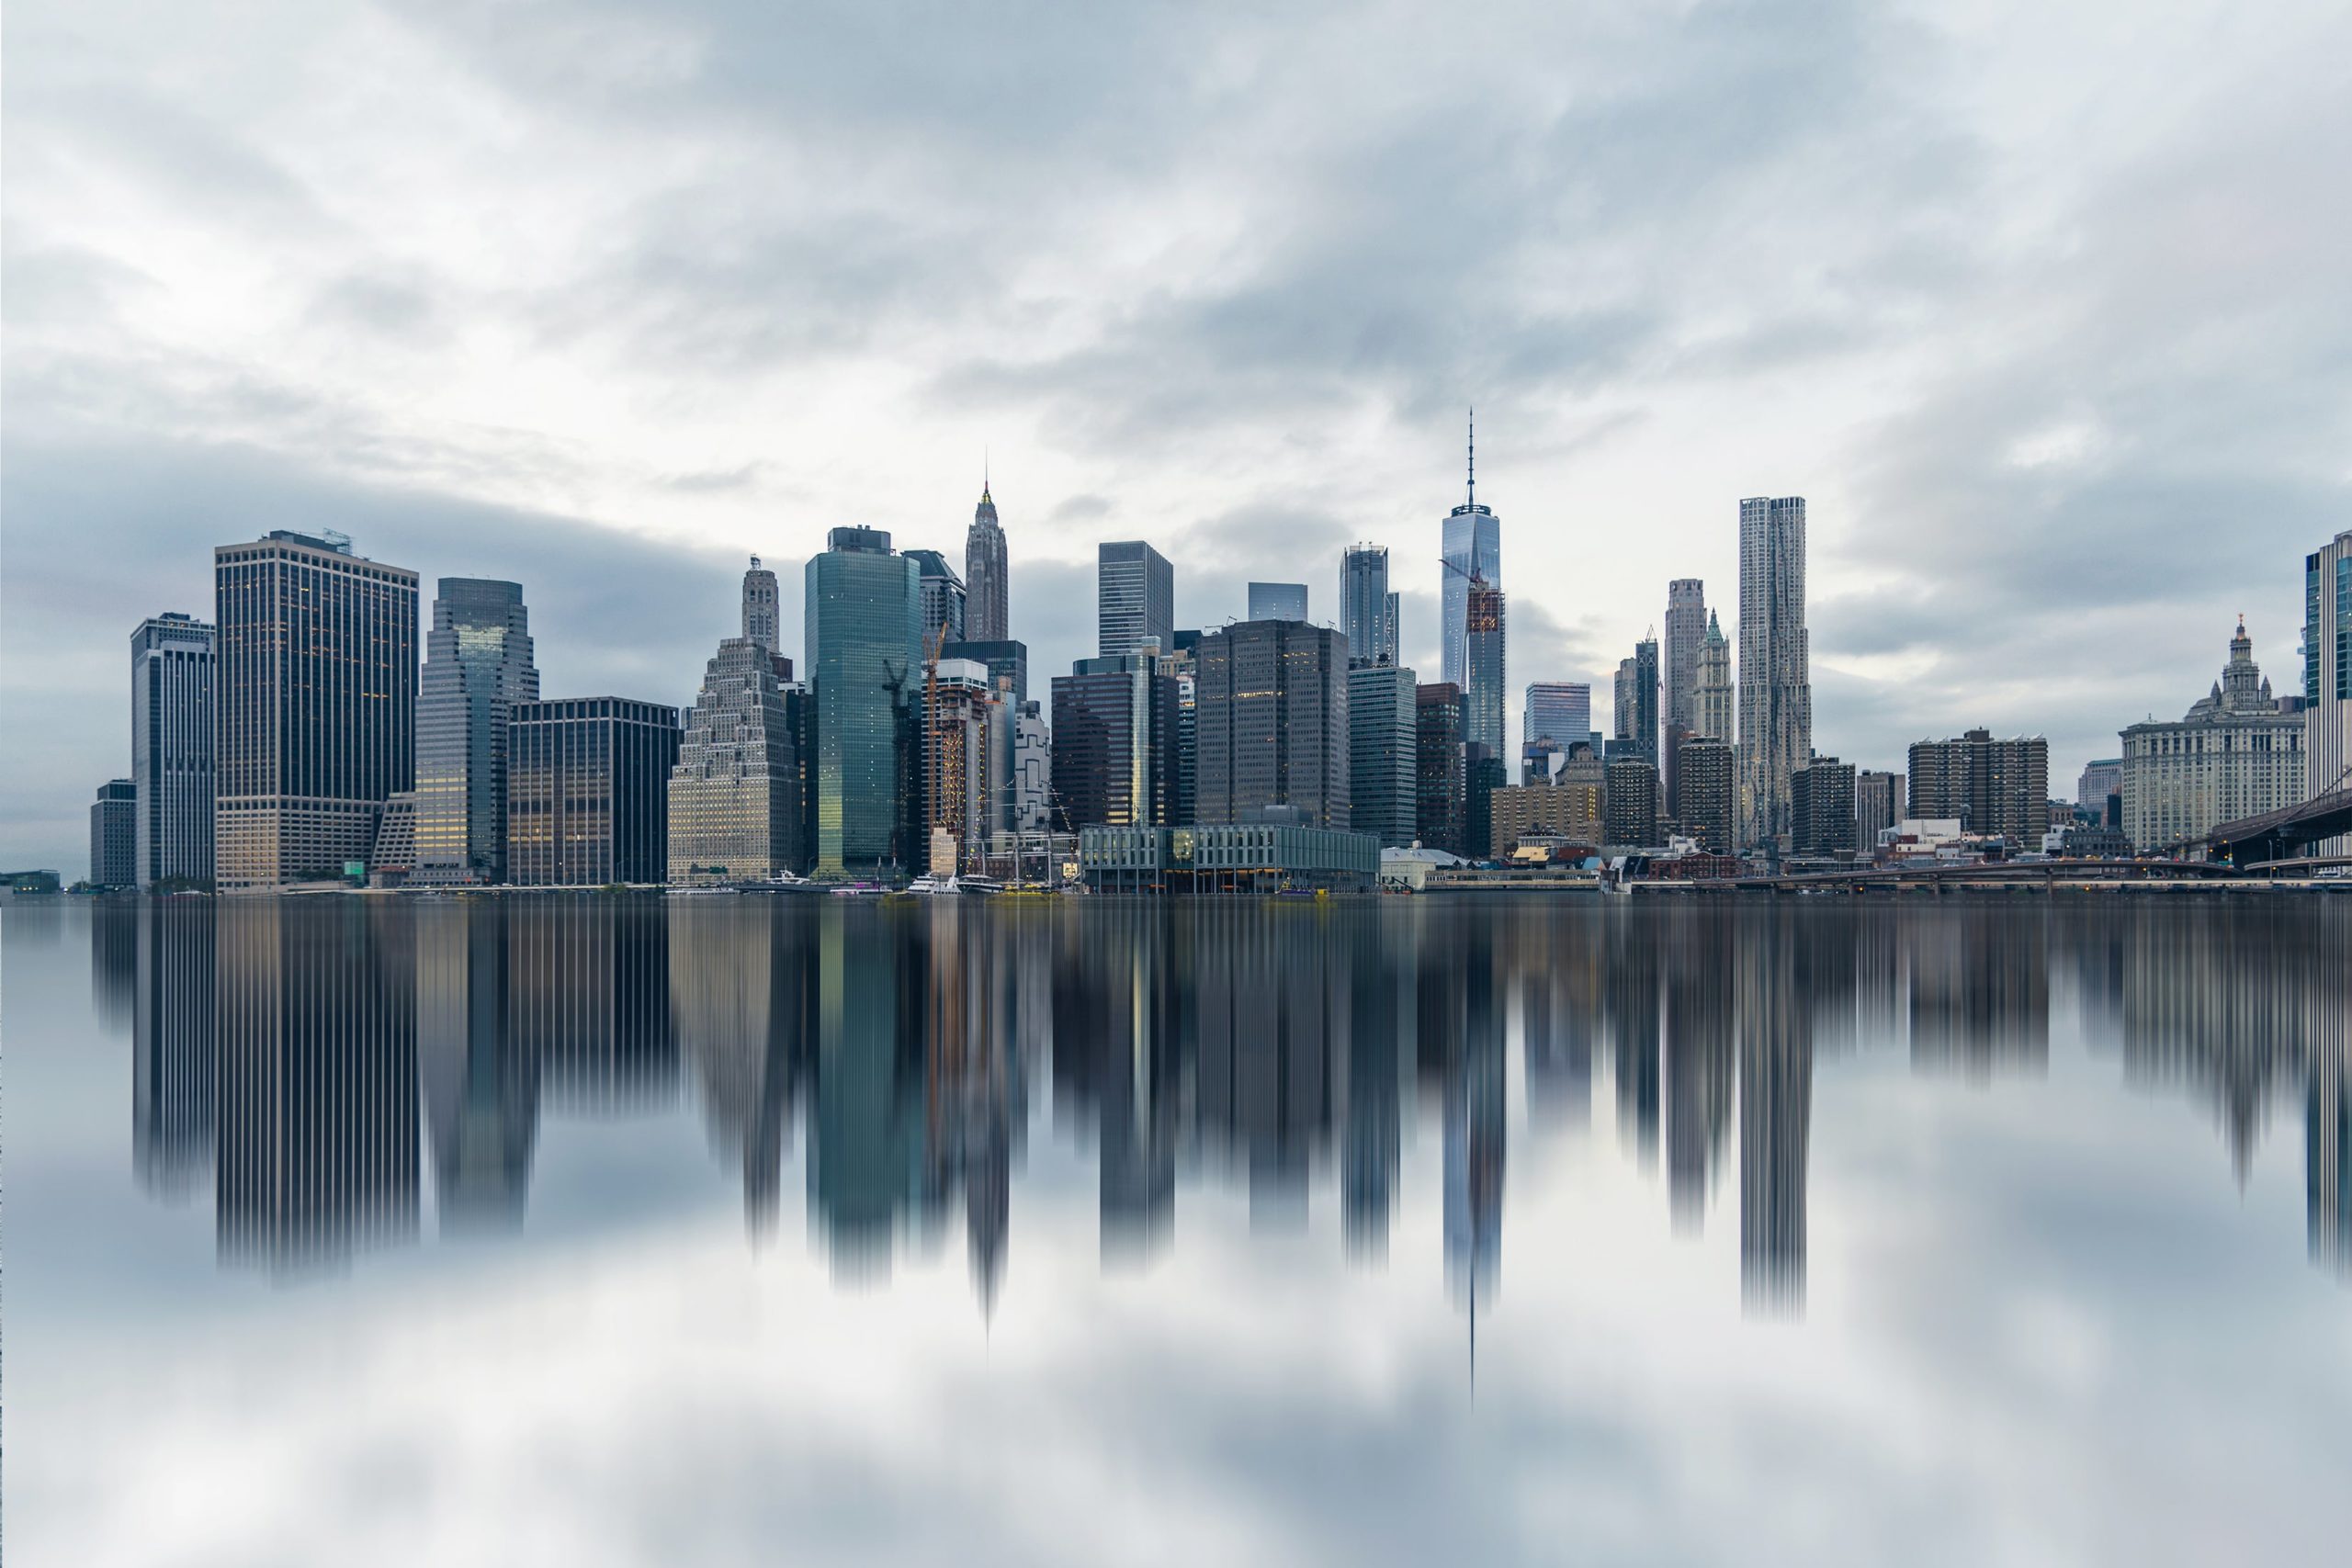 New York City Is Sinking under Its Own Weight